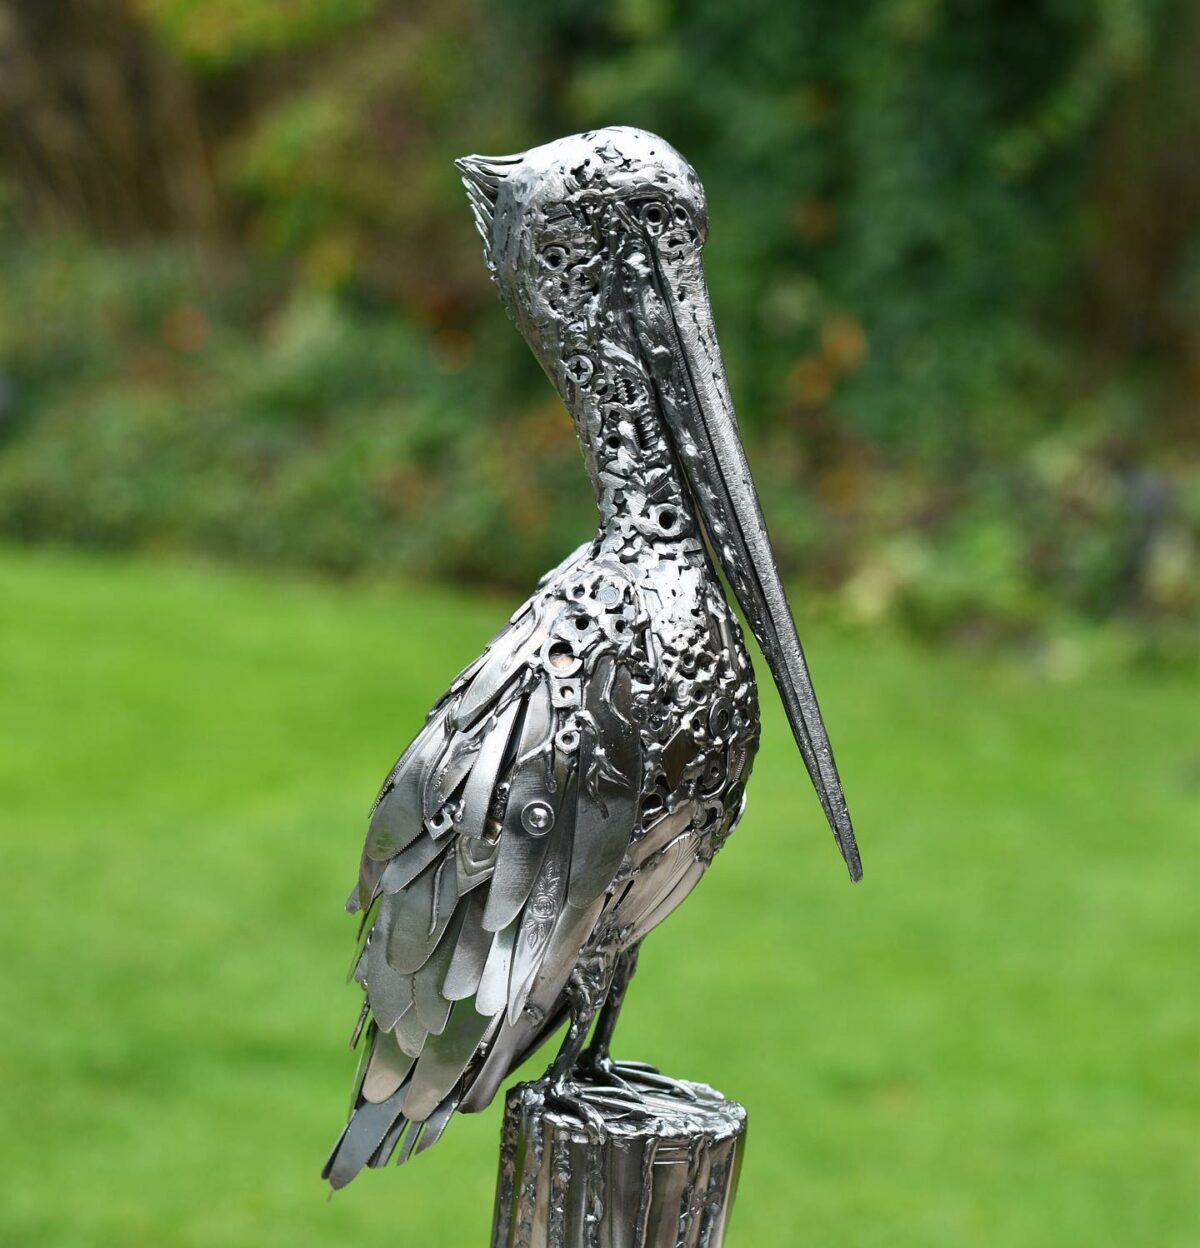 Incredible Welded Sculptures Made From Scrap Metal By Brian Mock 10